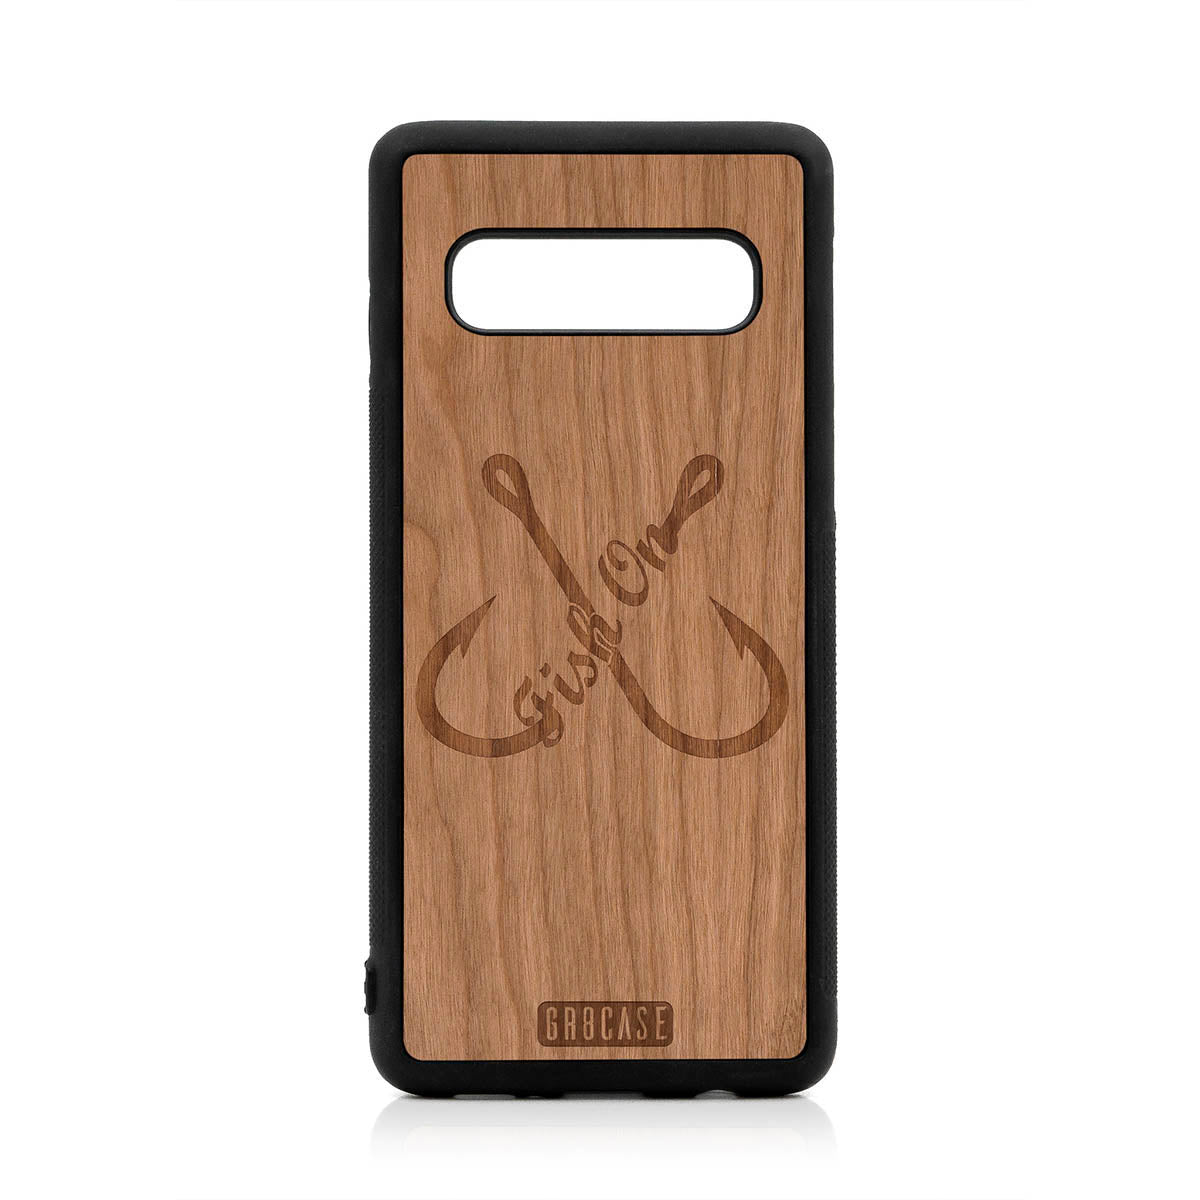 Fish On (Fish Hooks) Design Wood Case For Samsung Galaxy S10 by GR8CASE